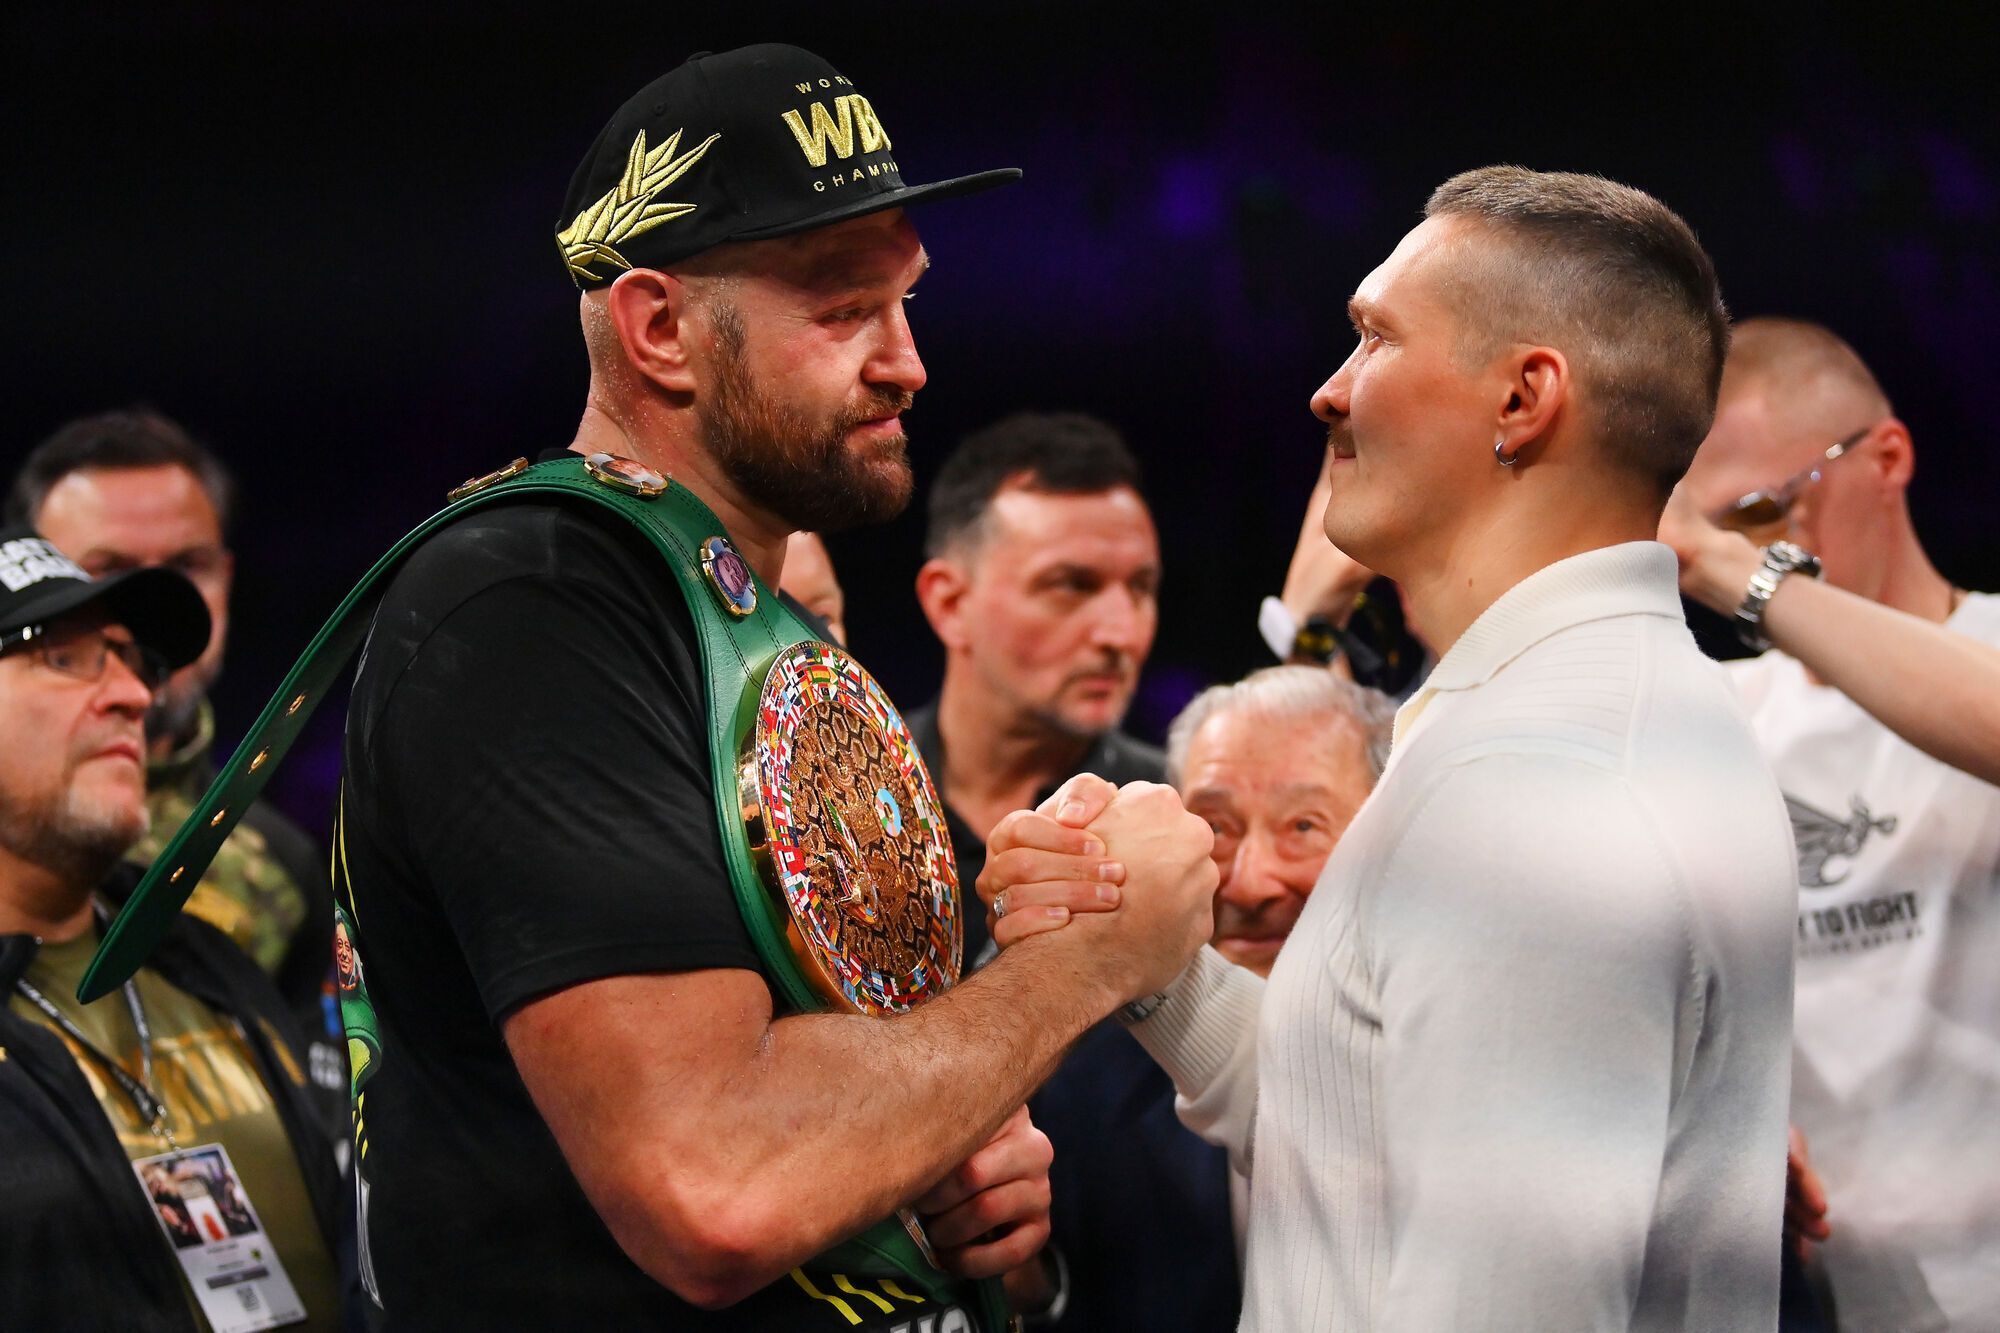 ''Has he aged overnight?'' Former world champion abruptly changes his forecast for Usyk-Fury fight